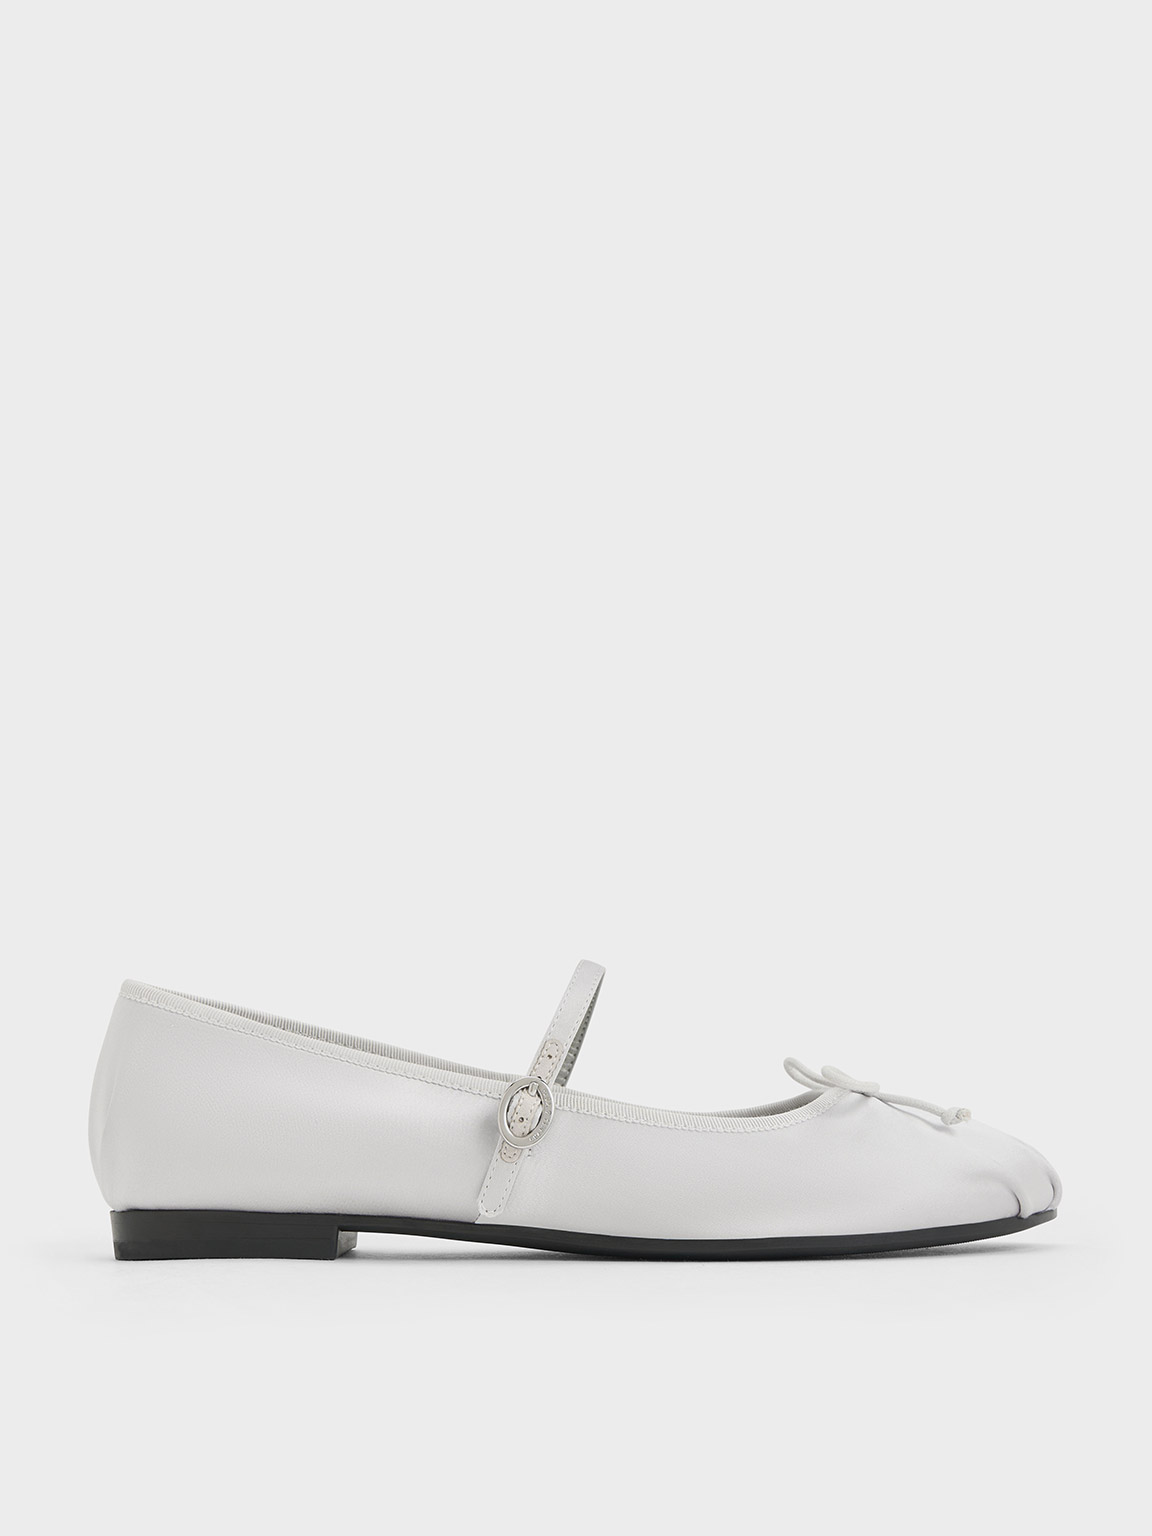 Charles & Keith Satin Bow Mary Jane Flats In Silver